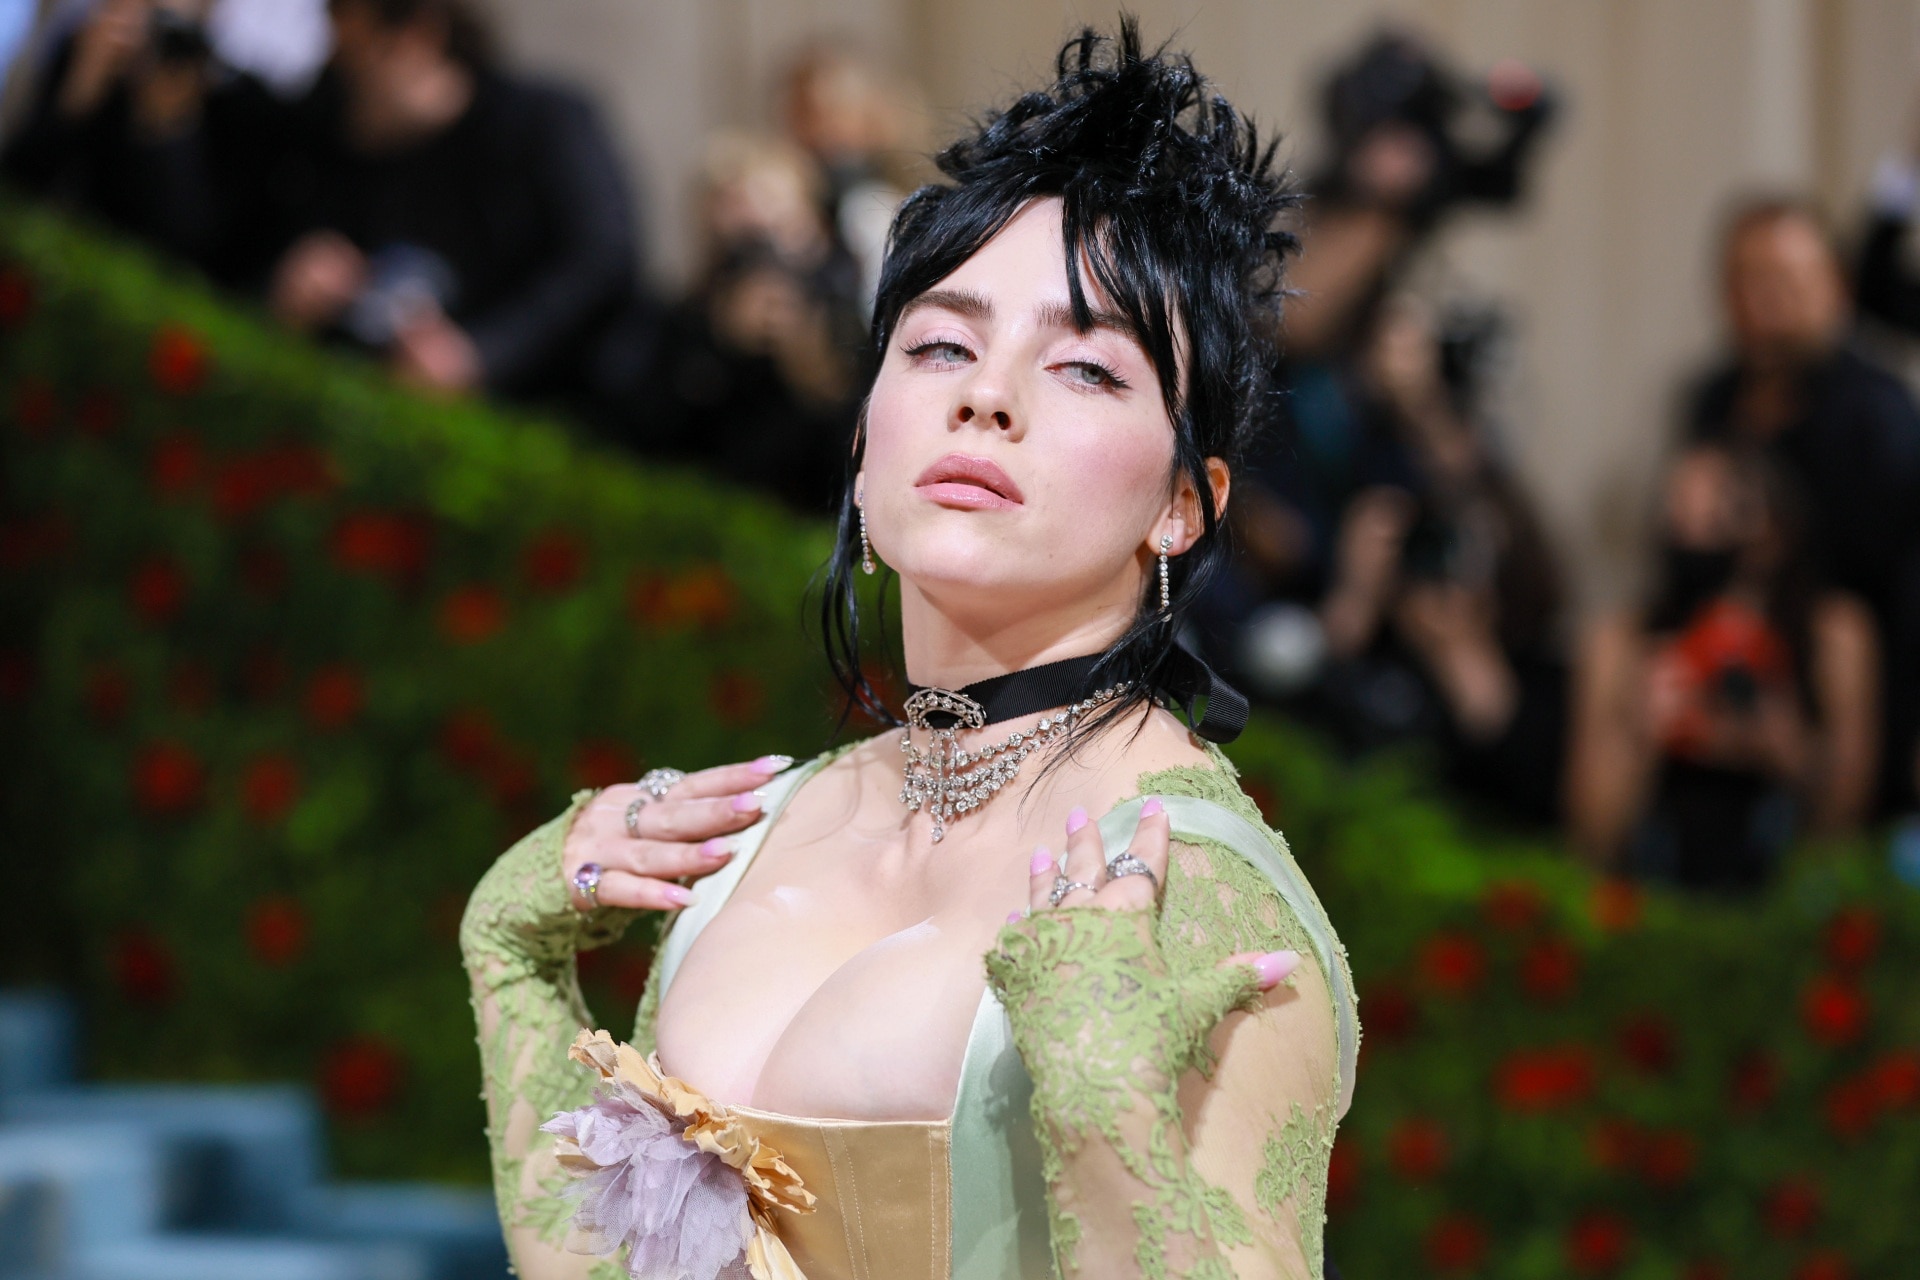 HoYeon Jung attends The 2022 Met Gala Celebrating 'In America: An